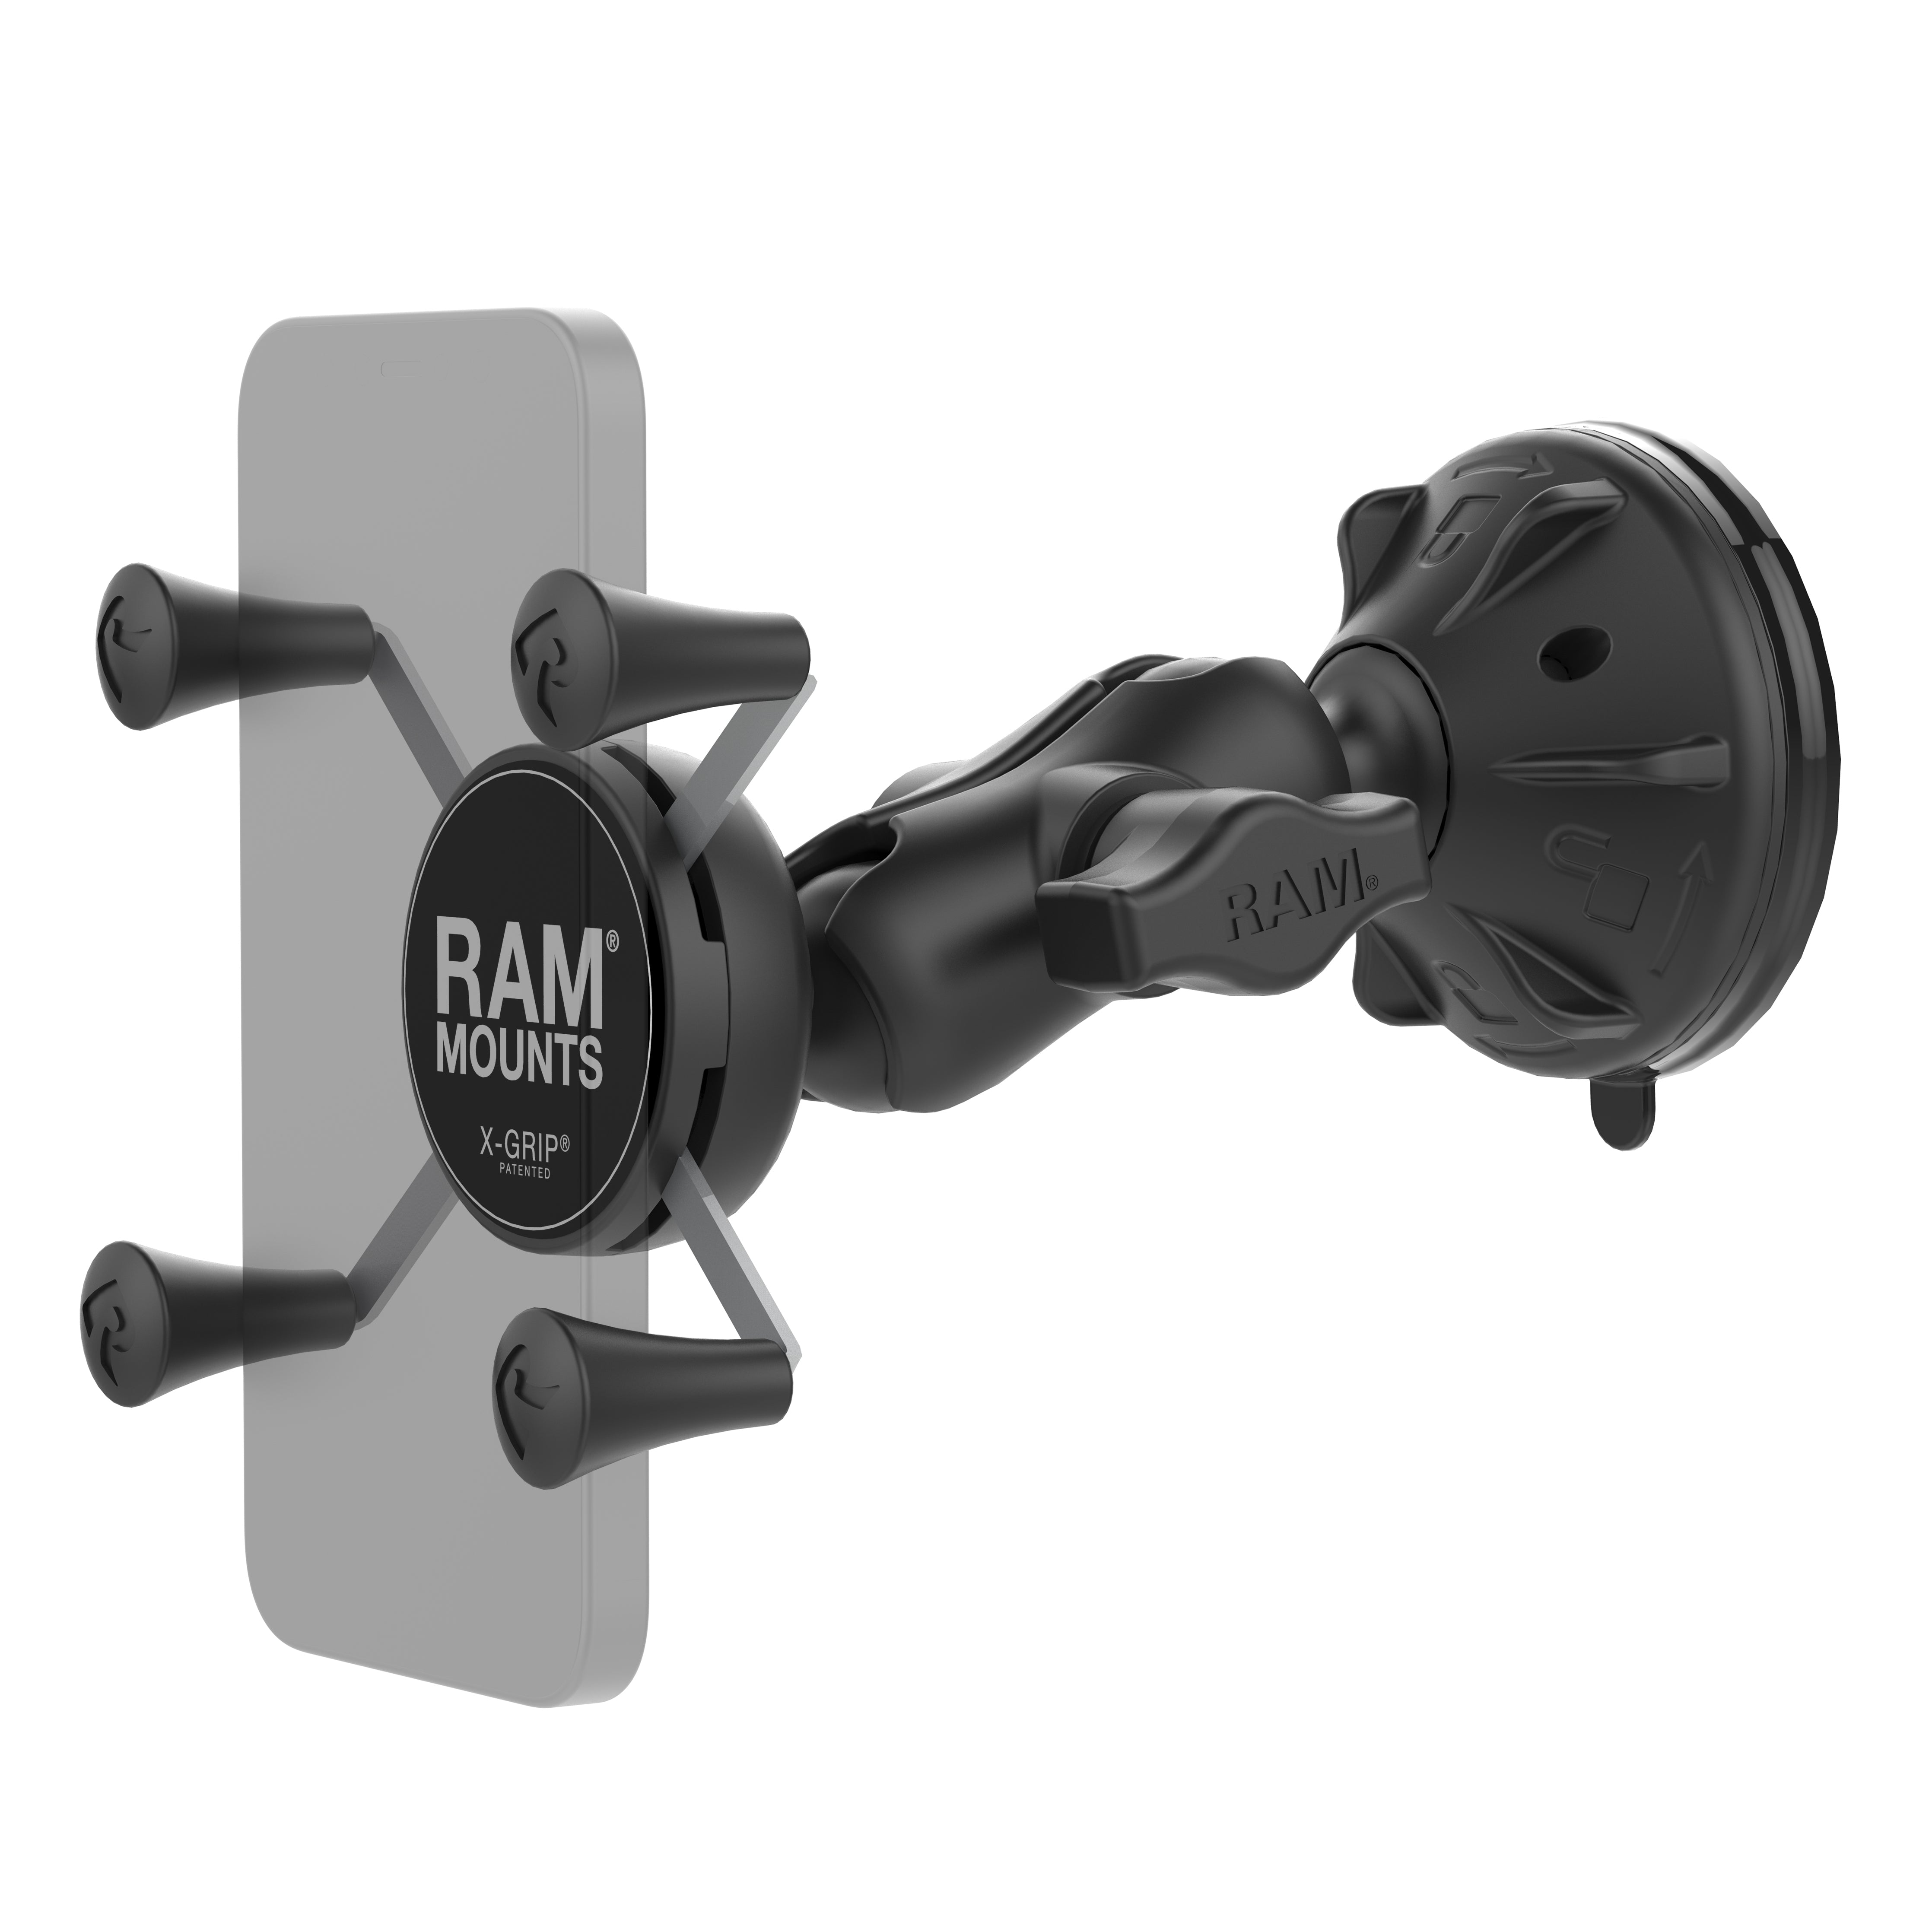 RAM® X-Grip® Large Phone Mount with Low Profile Suction Base – RAM